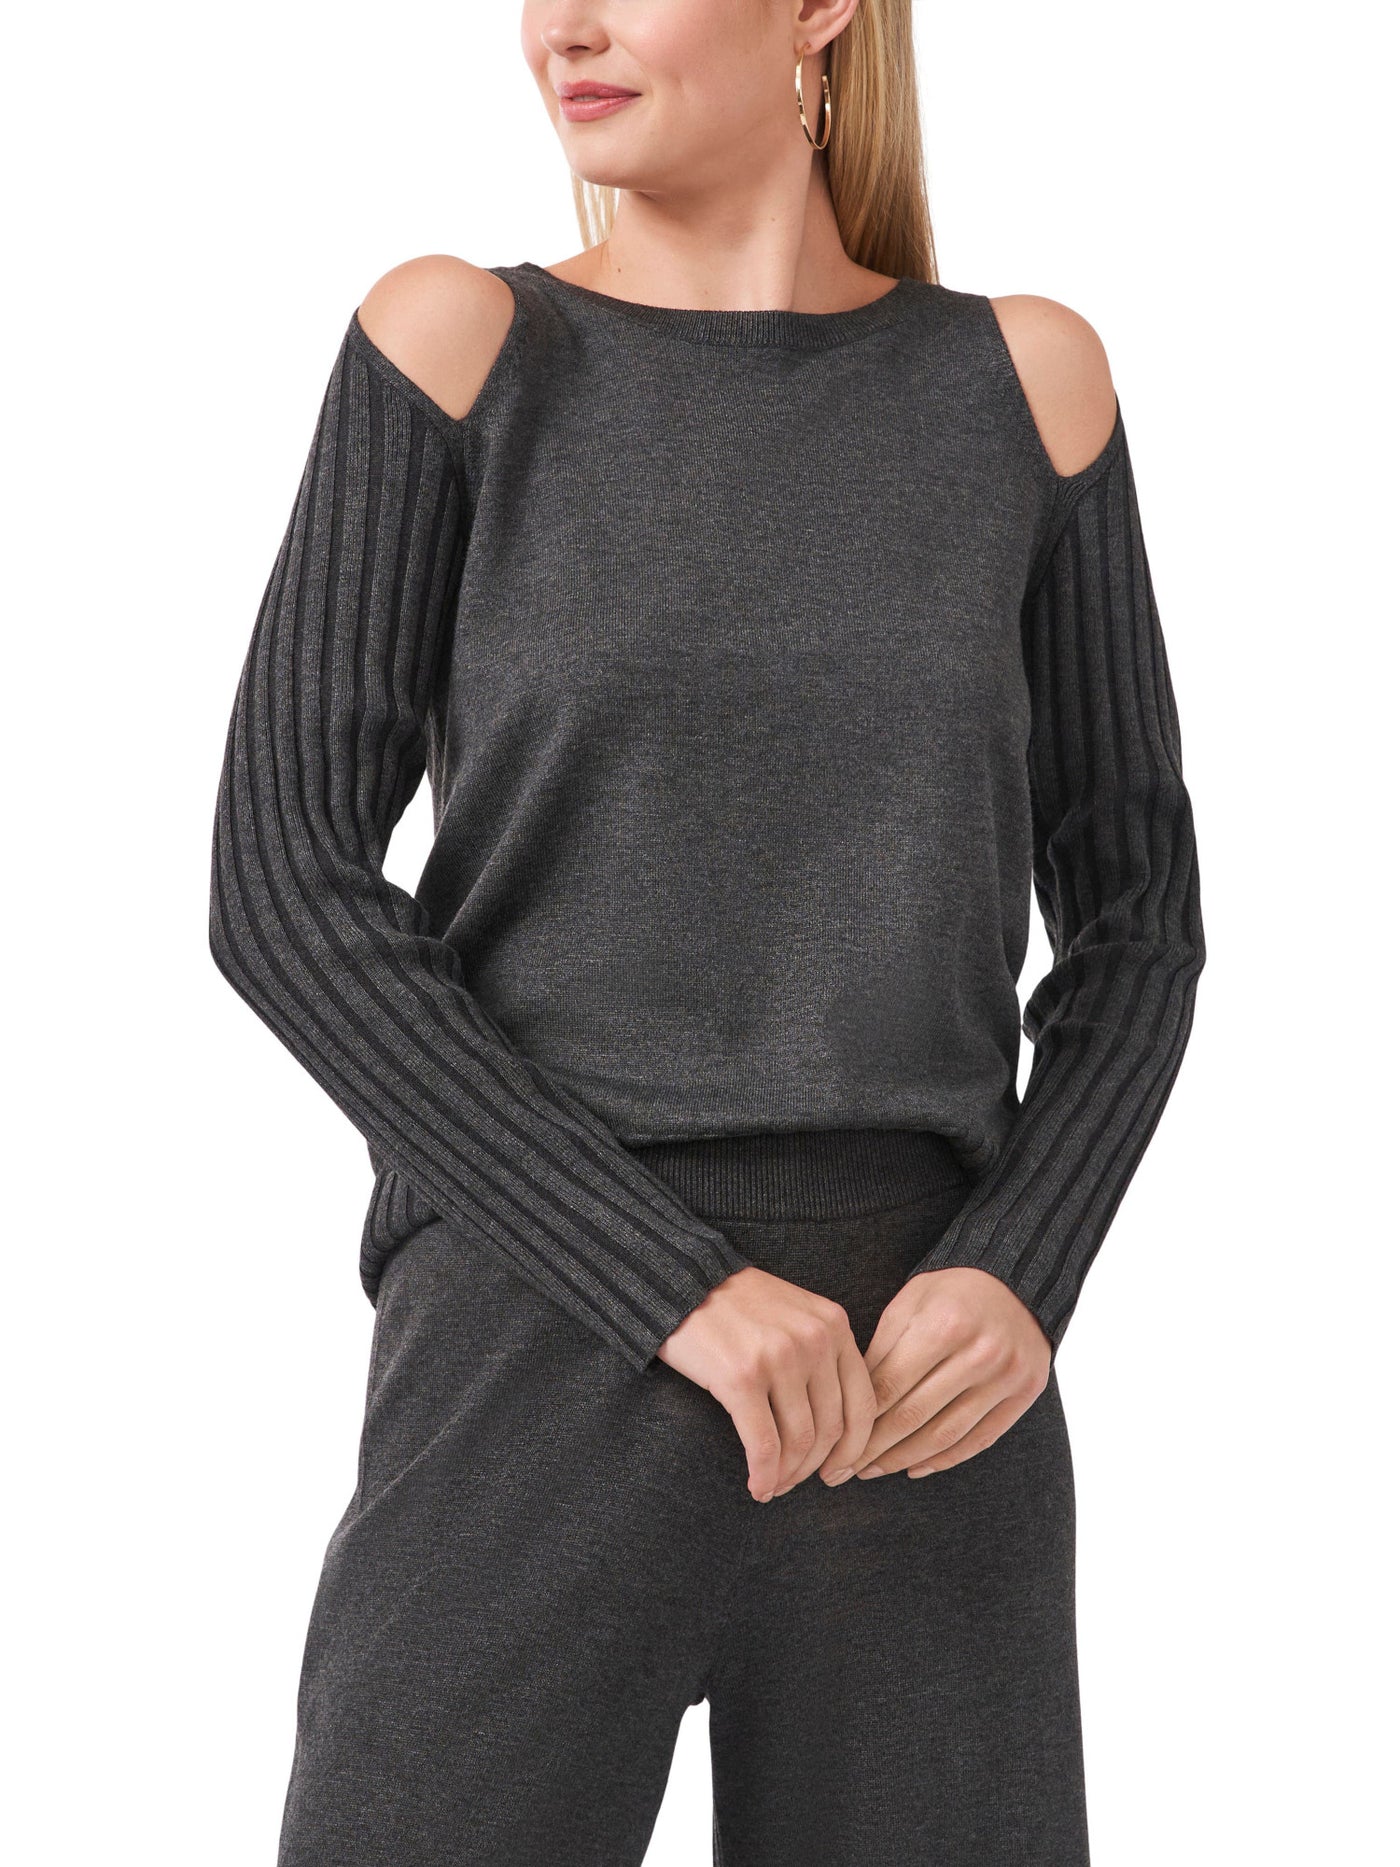 VINCE CAMUTO Womens Gray Stretch Ribbed Cold Shoulder Mixed Textured Long Sleeve Crew Neck Sweater L